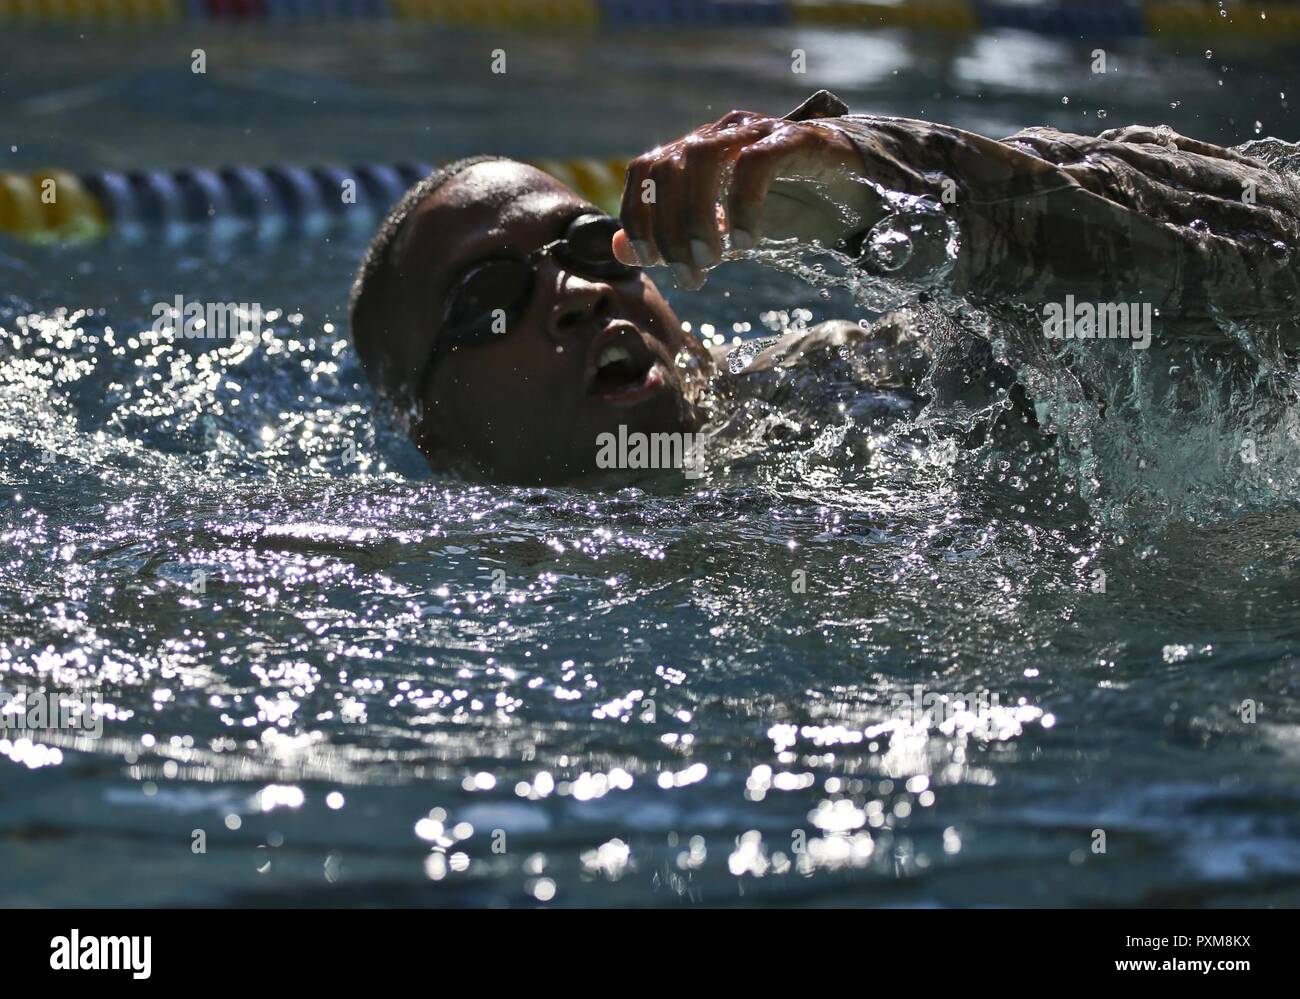 U.S. Air Force Staff Sgt. Rafiq Pickett from the New Jersey Air National Guard's 108th Security Forces Squadron swims the 100 meter challenge during a German Armed Forces Badge for Military Proficiency test at Joint Base McGuire-Dix-Lakehurst, N.J., June 13, 2017. The test included an 1x10-meter sprint, flex arm hang, 1,000 meter run, 100 meter swim in Military Uniform, marksmanship, and a timed foot march. Stock Photo